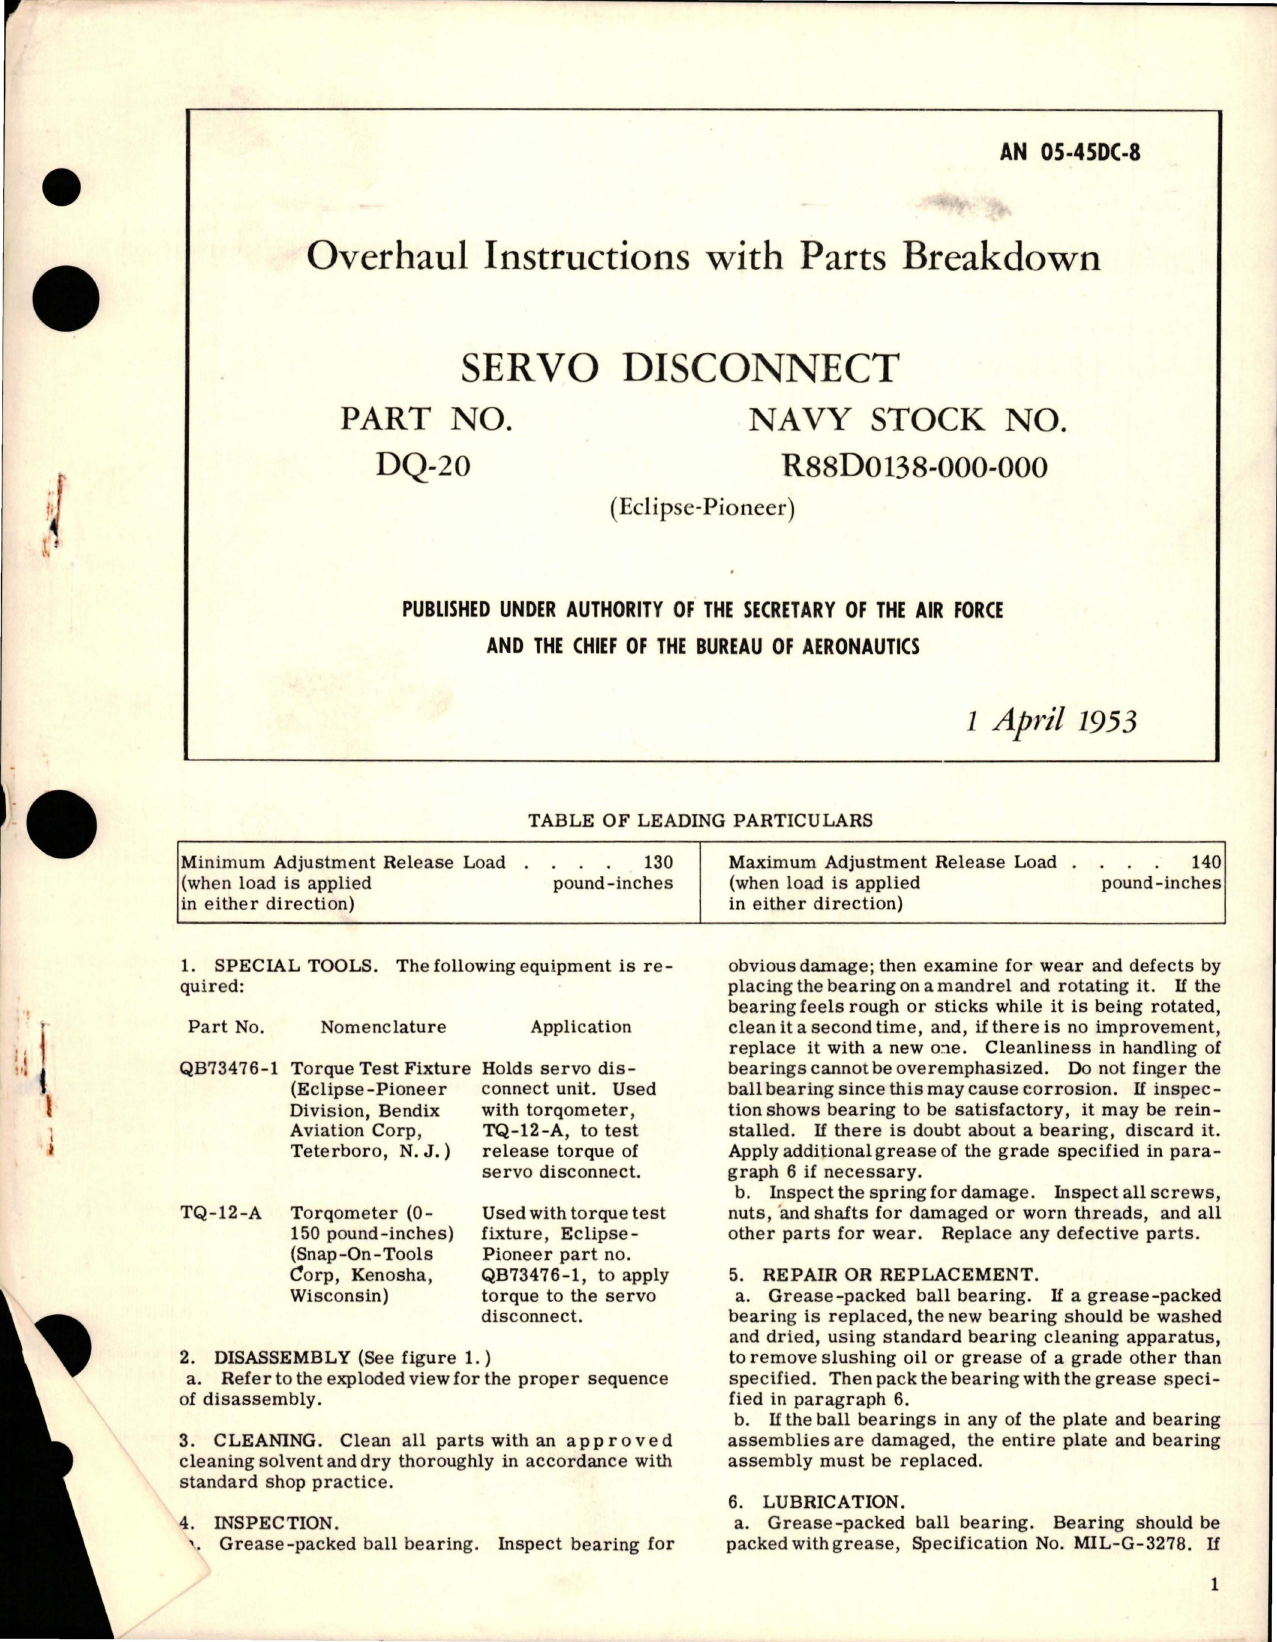 Sample page 1 from AirCorps Library document: Overhaul Instructions with Parts Breakdown for Servo Disconnect - Part DQ-20